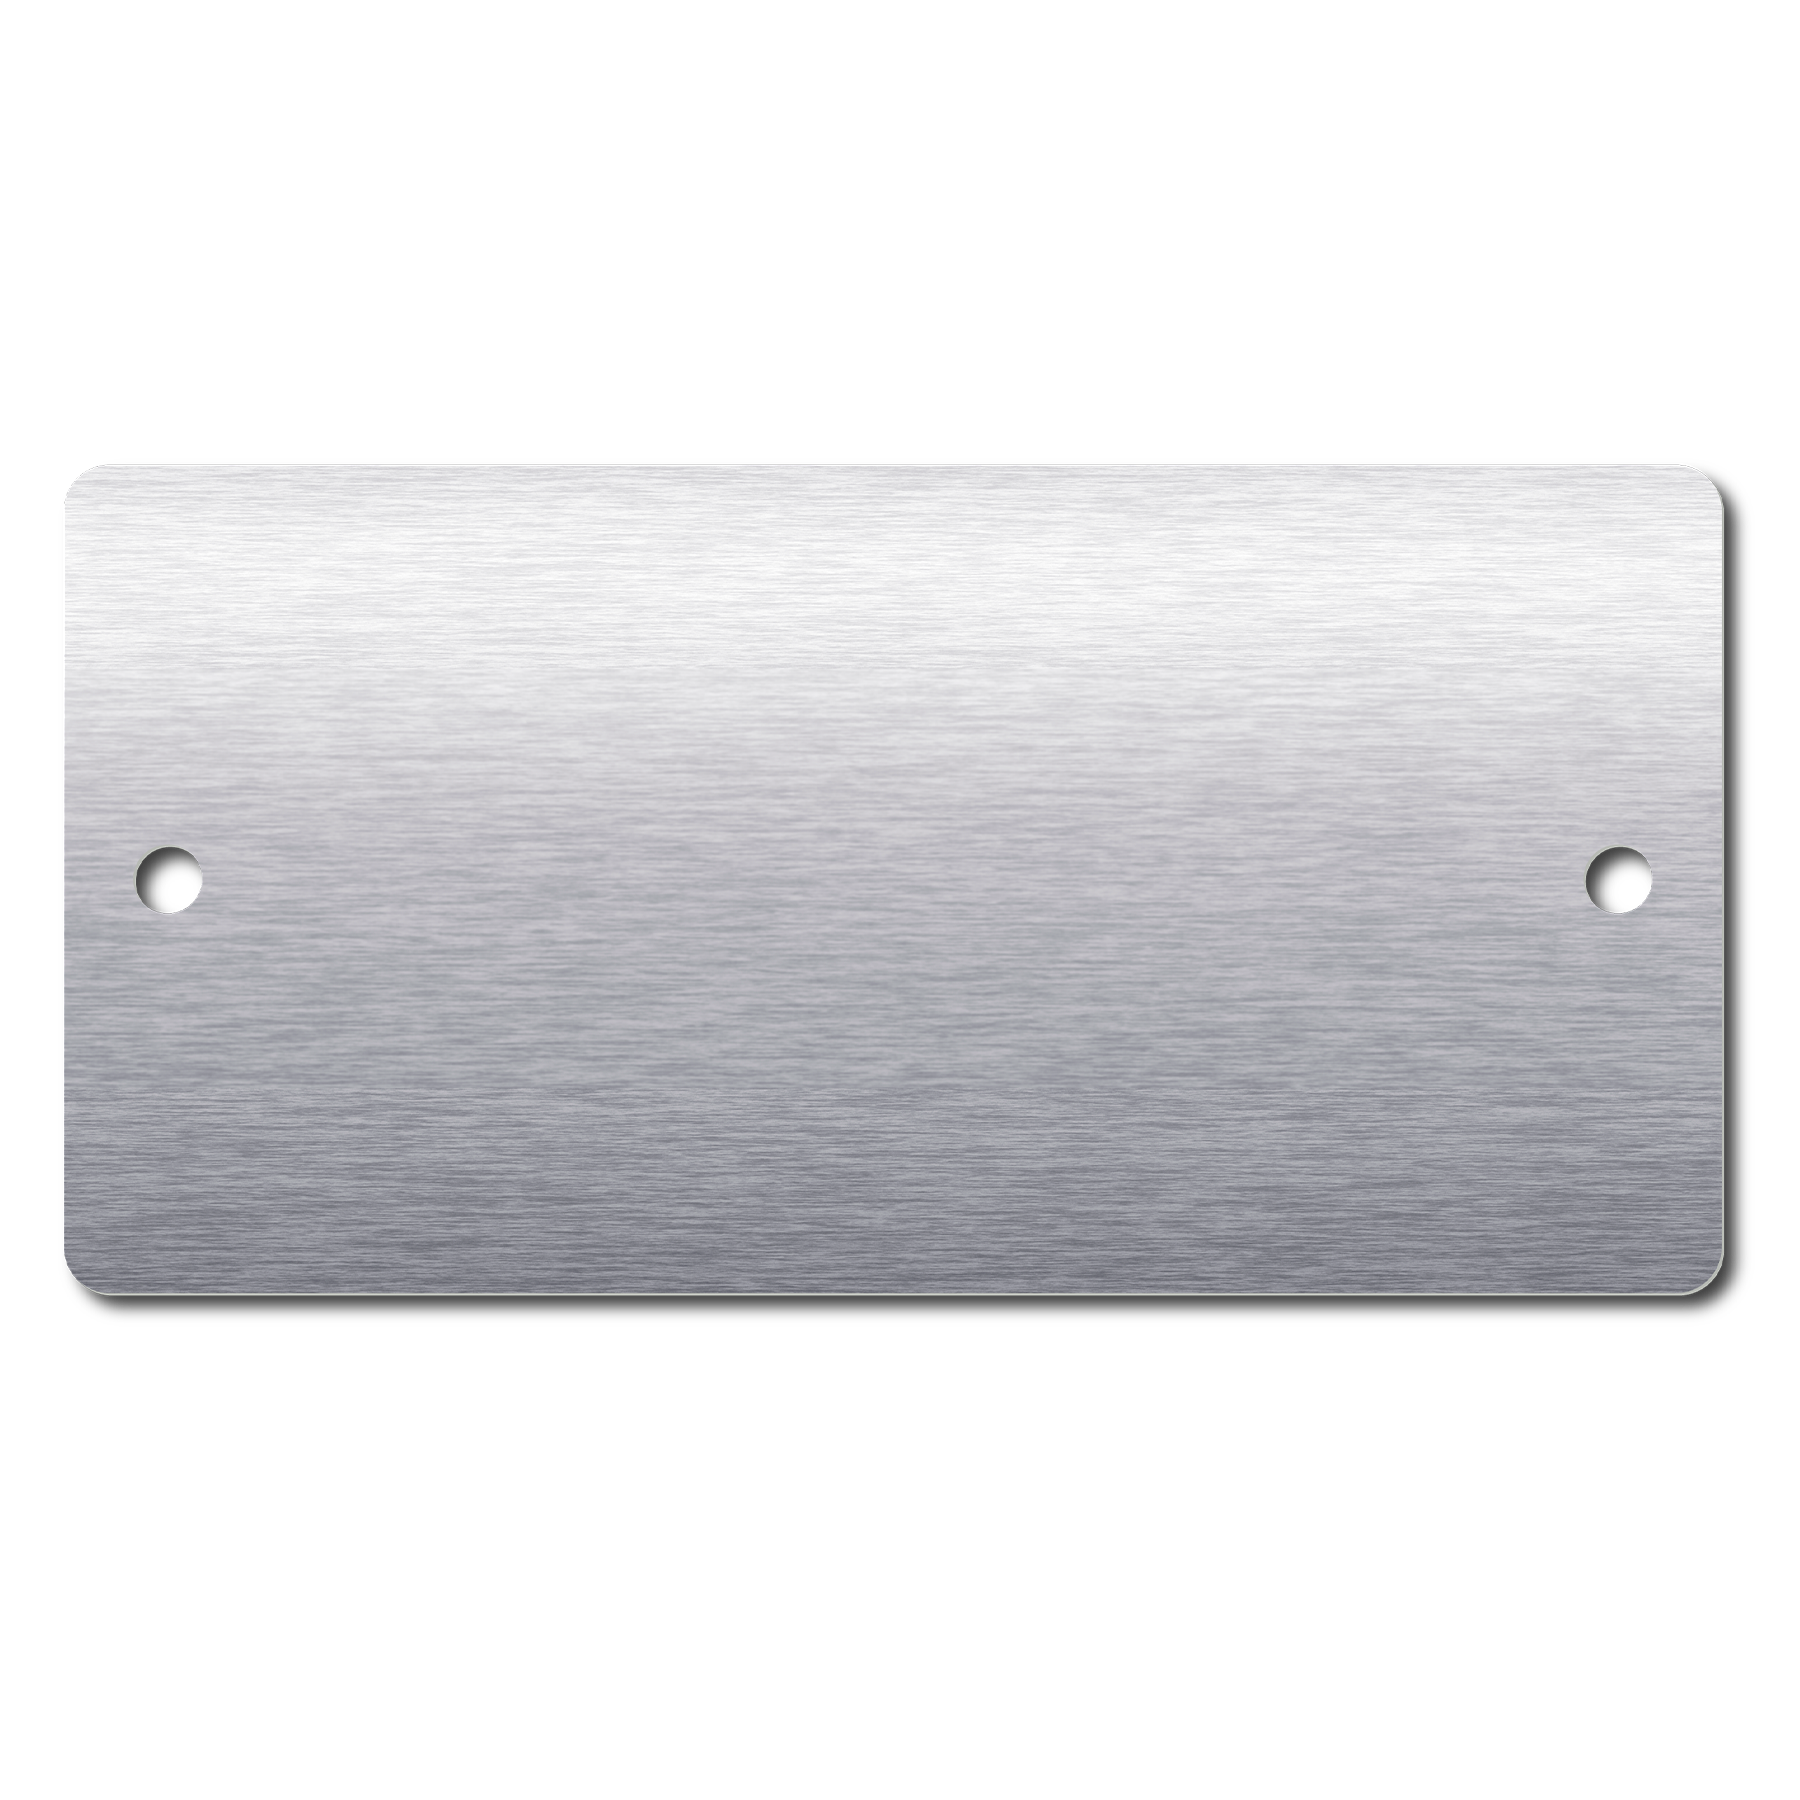 Anodized Aluminum Rectangle Tags, 1-1/2" x 3" with 1/8" Holes, Laser Engraved - Craftworks NW, LLC